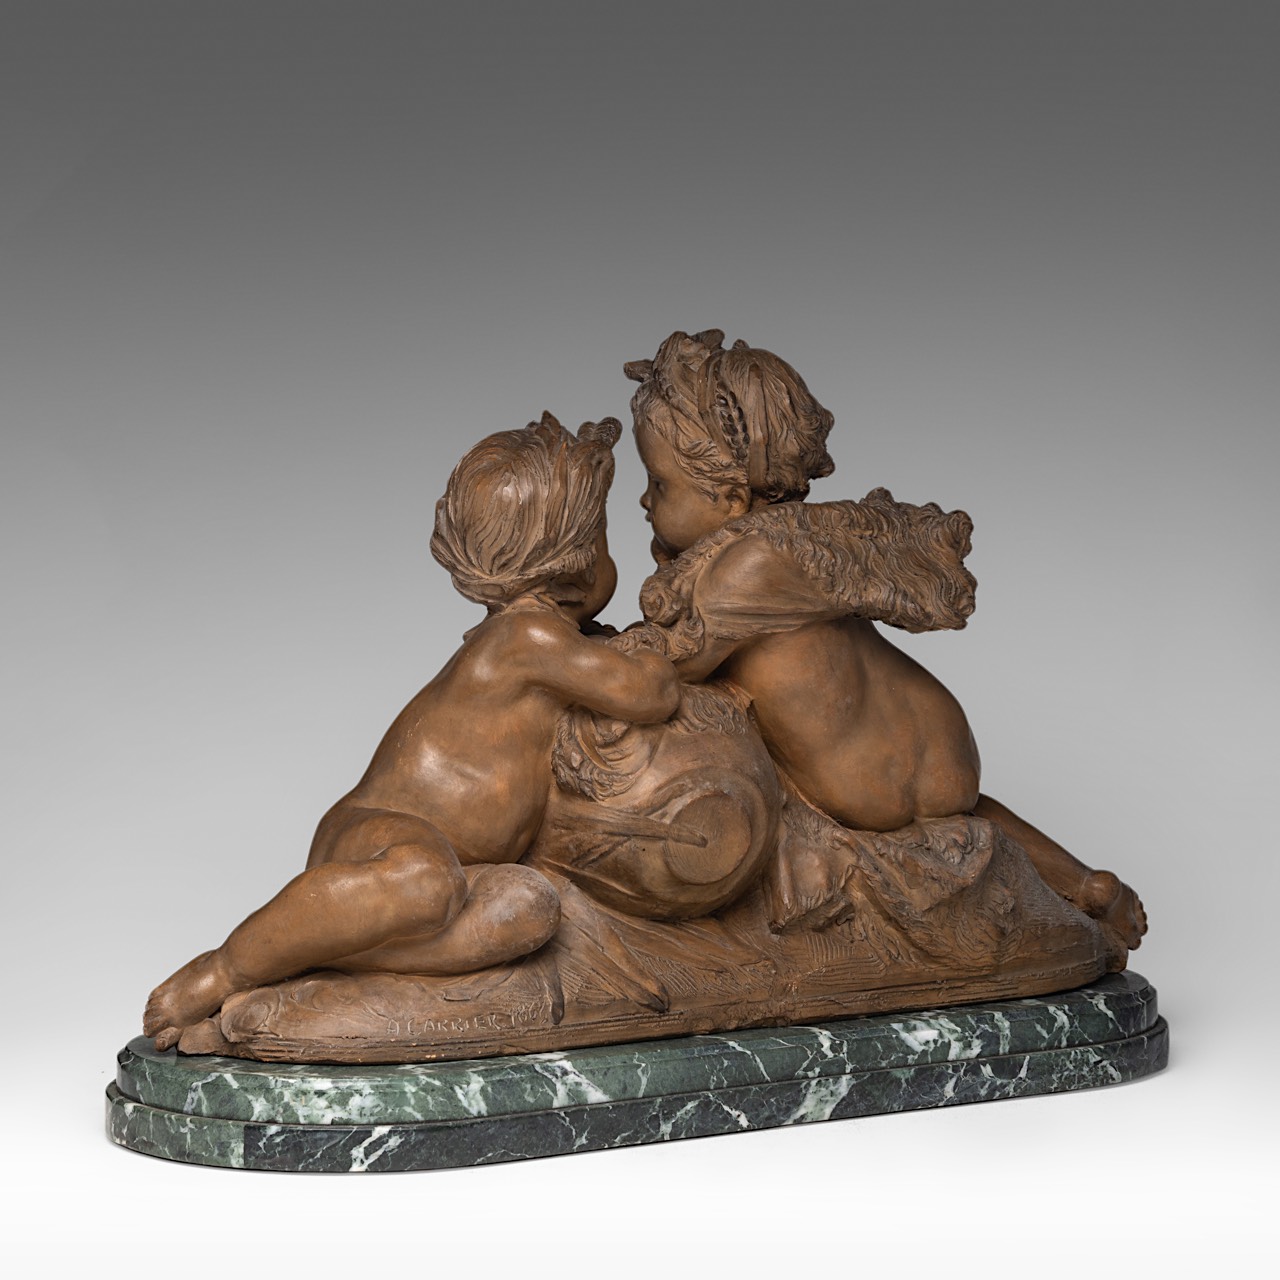 Carrier-Belleuse (1824-1887), two putti by the fountain, terracotta on a marble base, H 43 - W 68 cm - Bild 4 aus 10